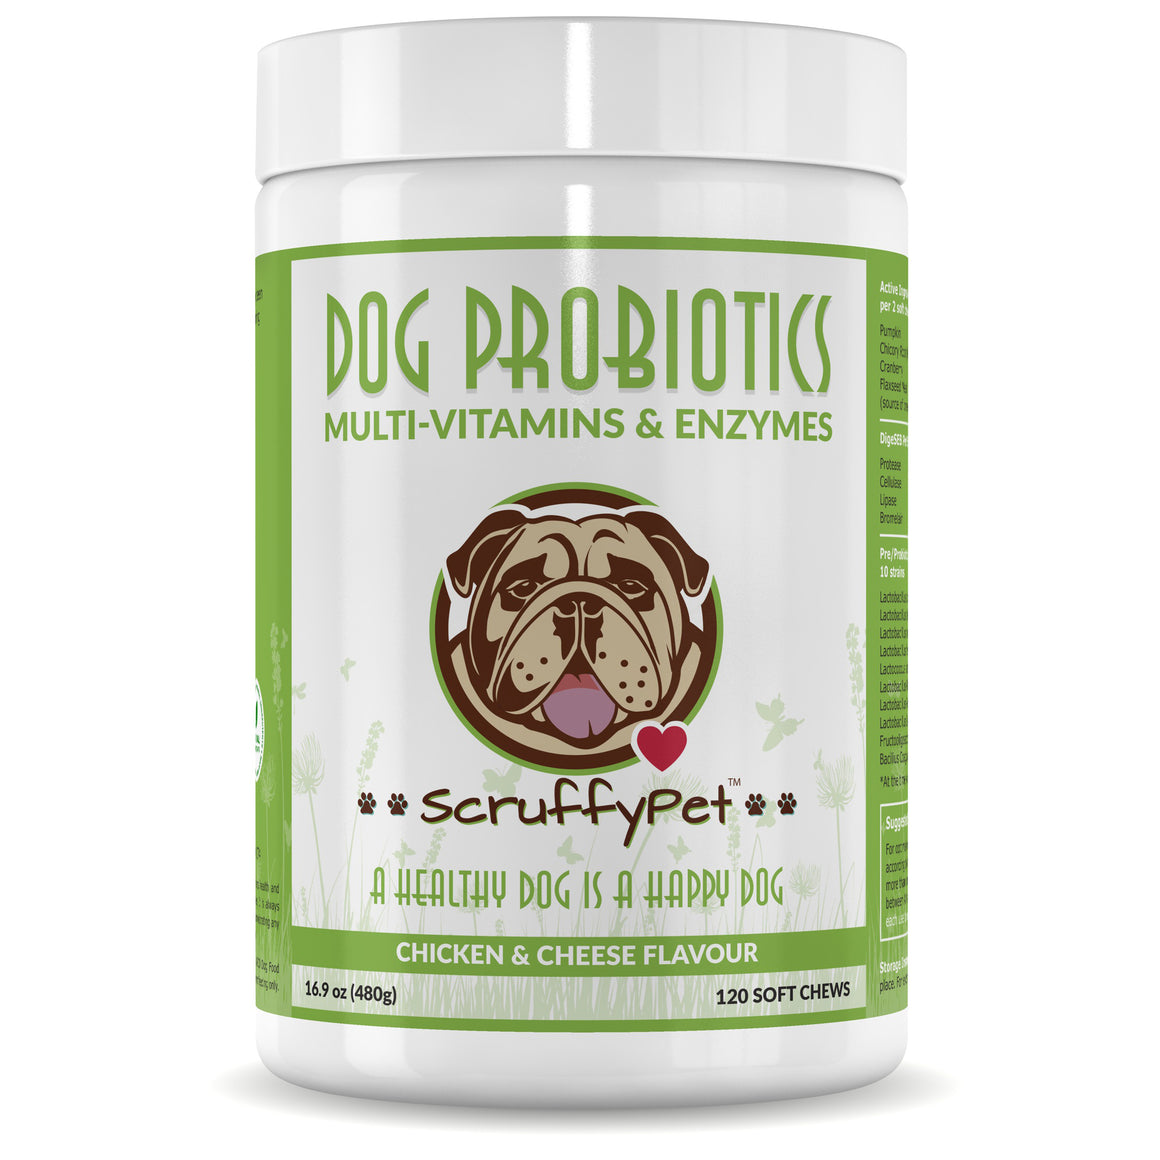 ScruffyPet Probiotics for Dogs with Multivitamins Minerals and Digestive Enzymes, 36 Active Ingredients Per Soft Chew 120ct